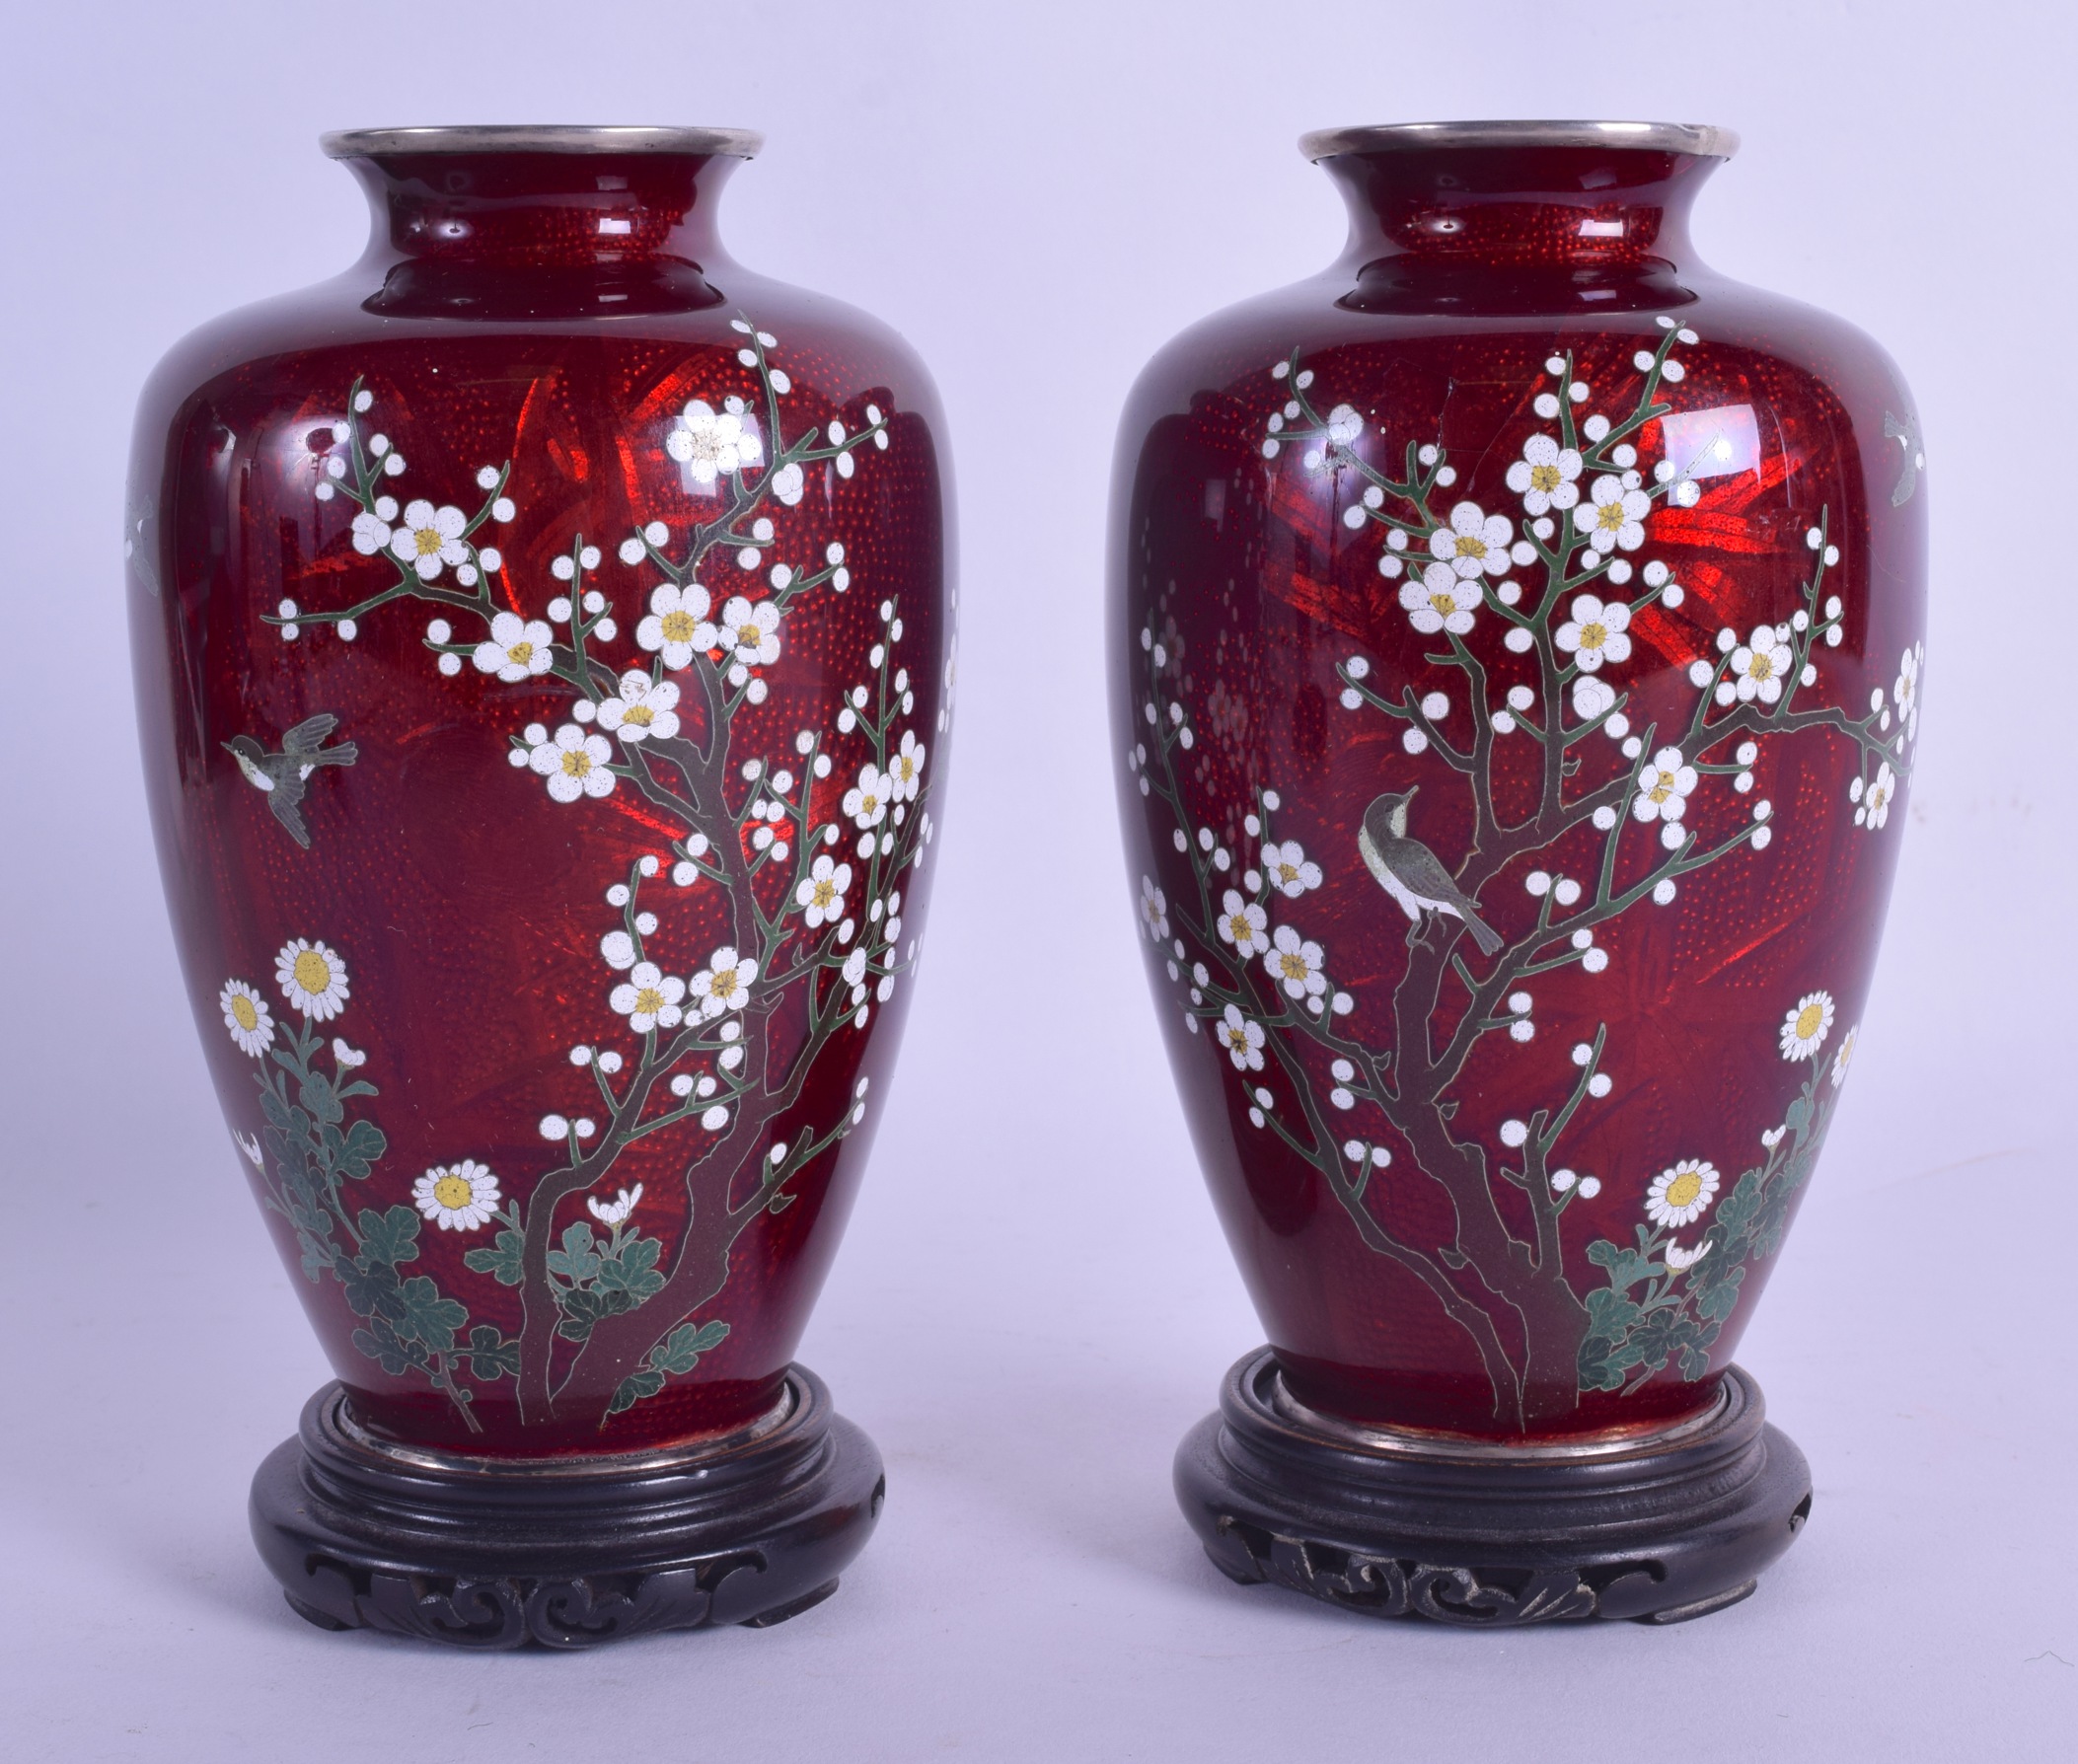 A LOVELY PAIR OF LATE 19TH CENTURY JAPANESE MEIJI PERIOD CLOISONNE ENAMEL VASES with silver